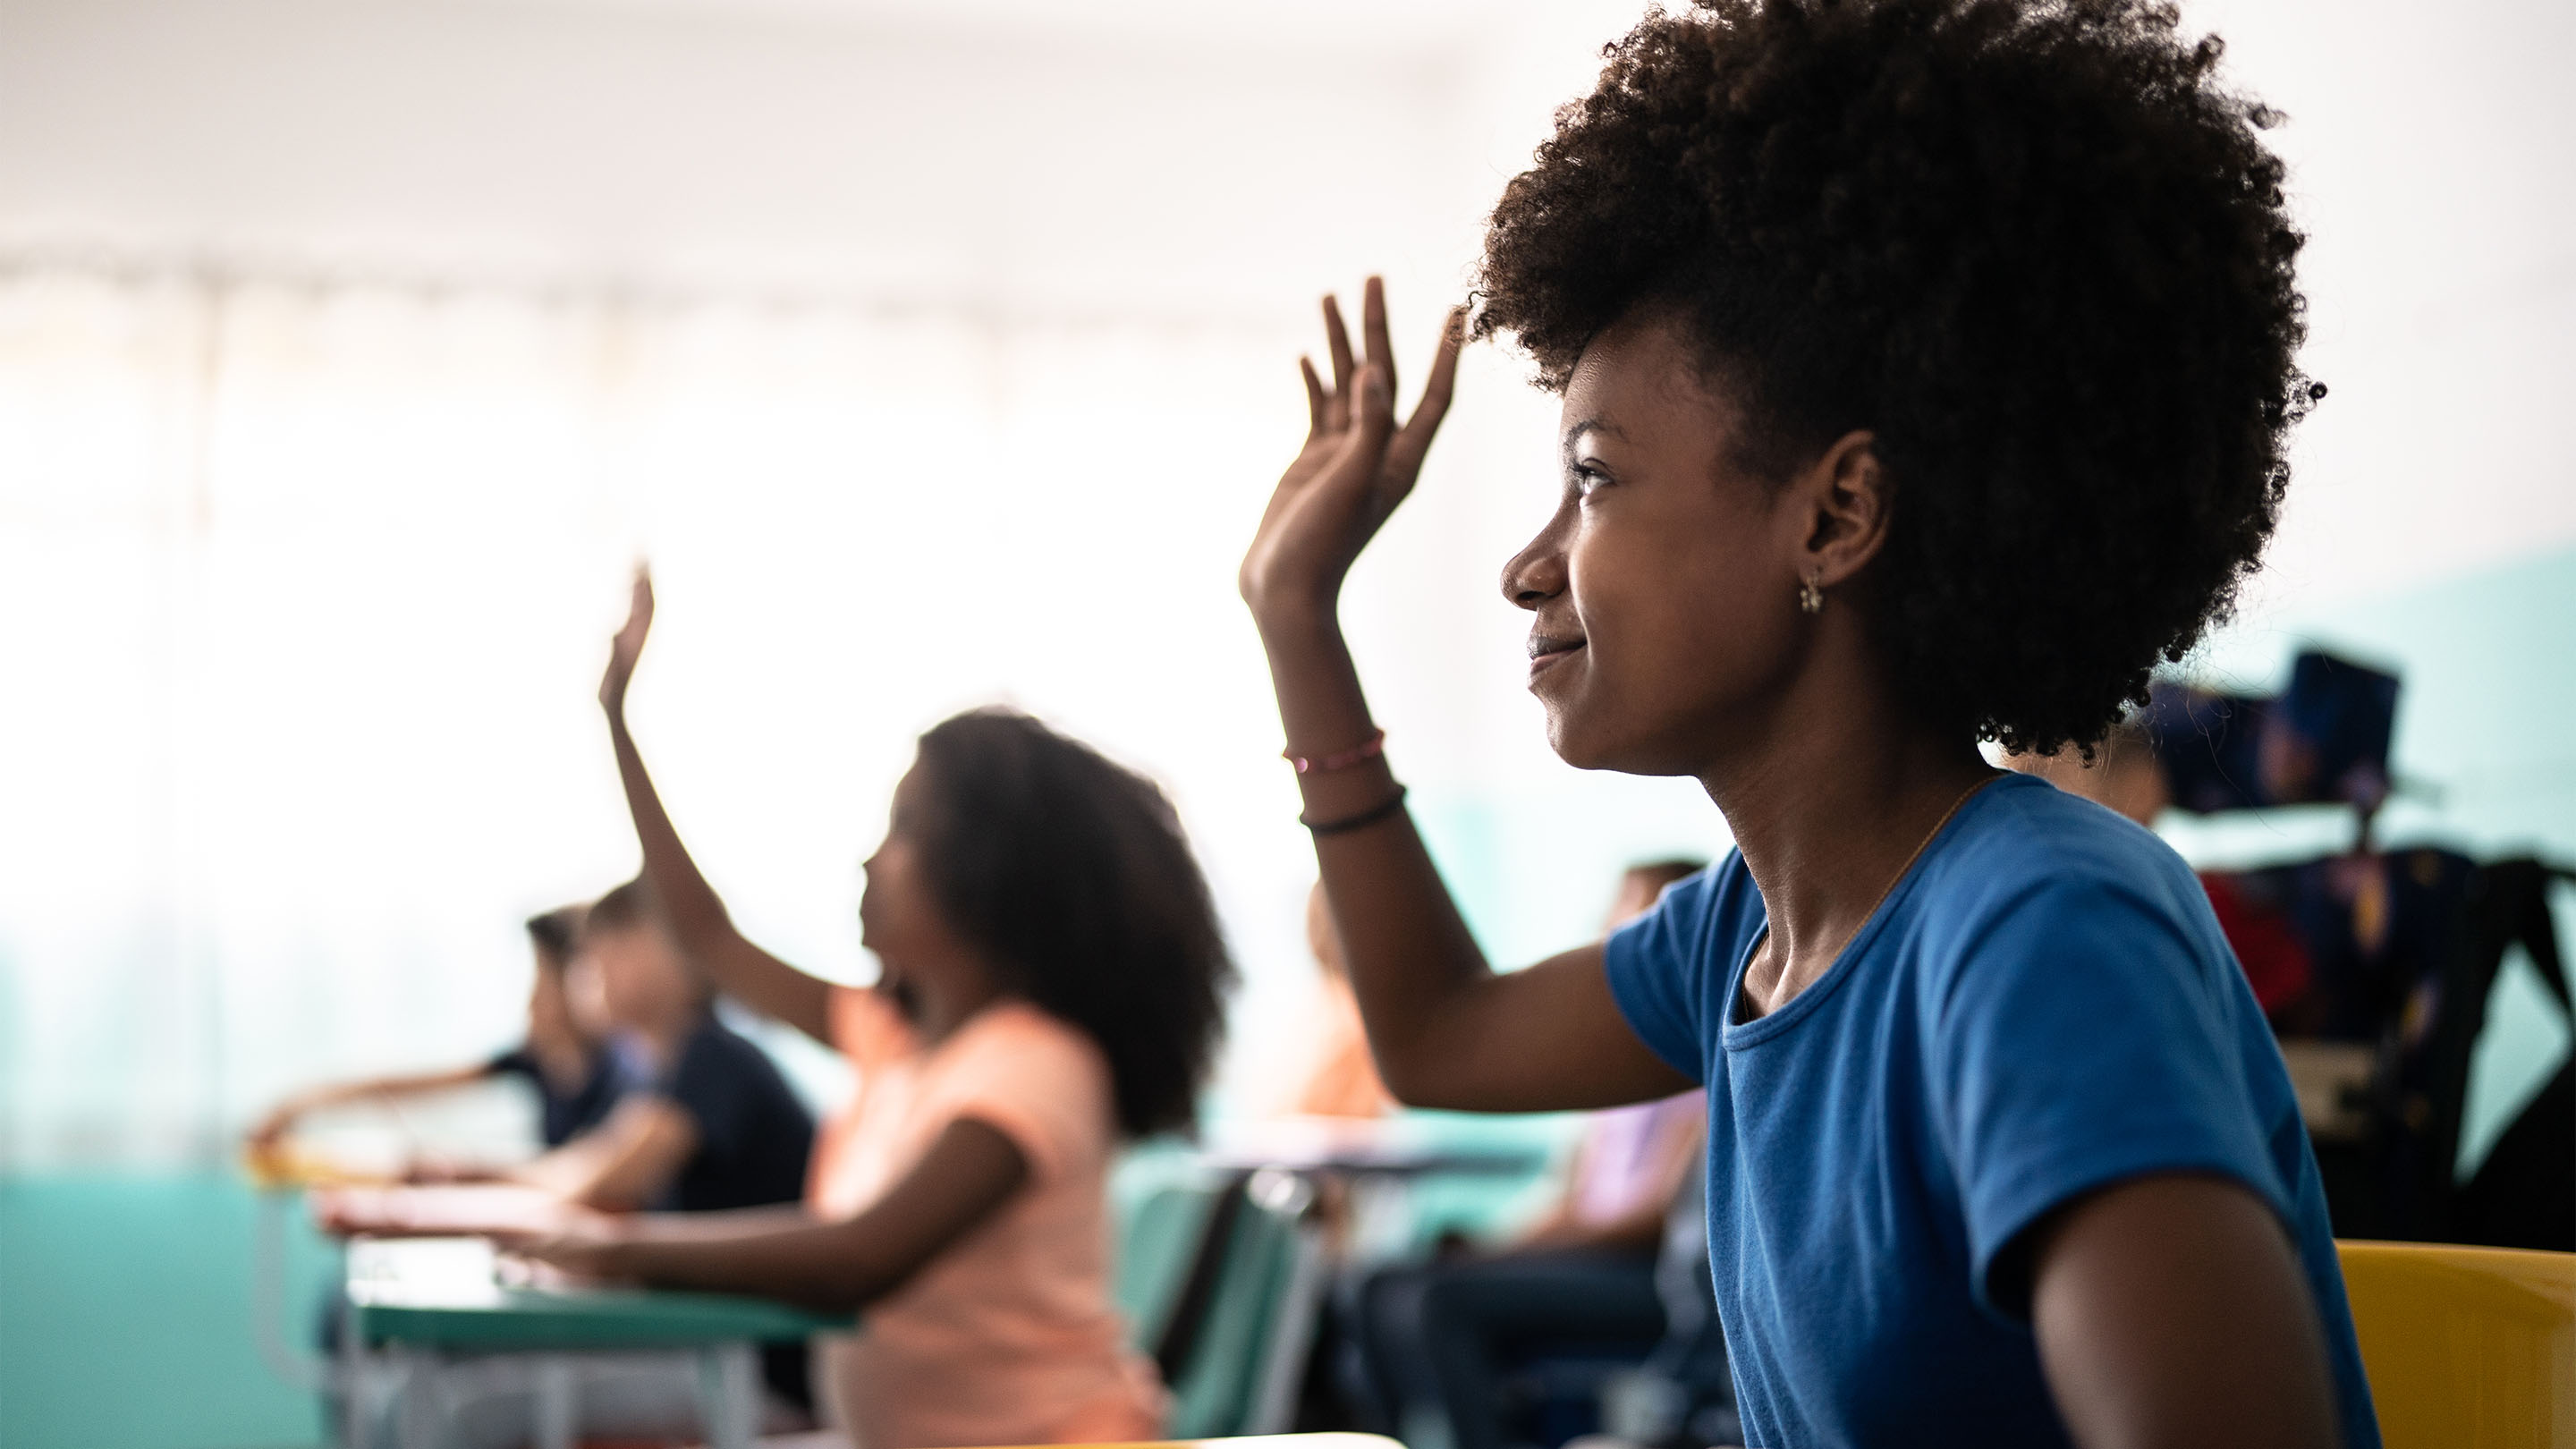 When Natural Hair Wins, Discrimination in School Loses